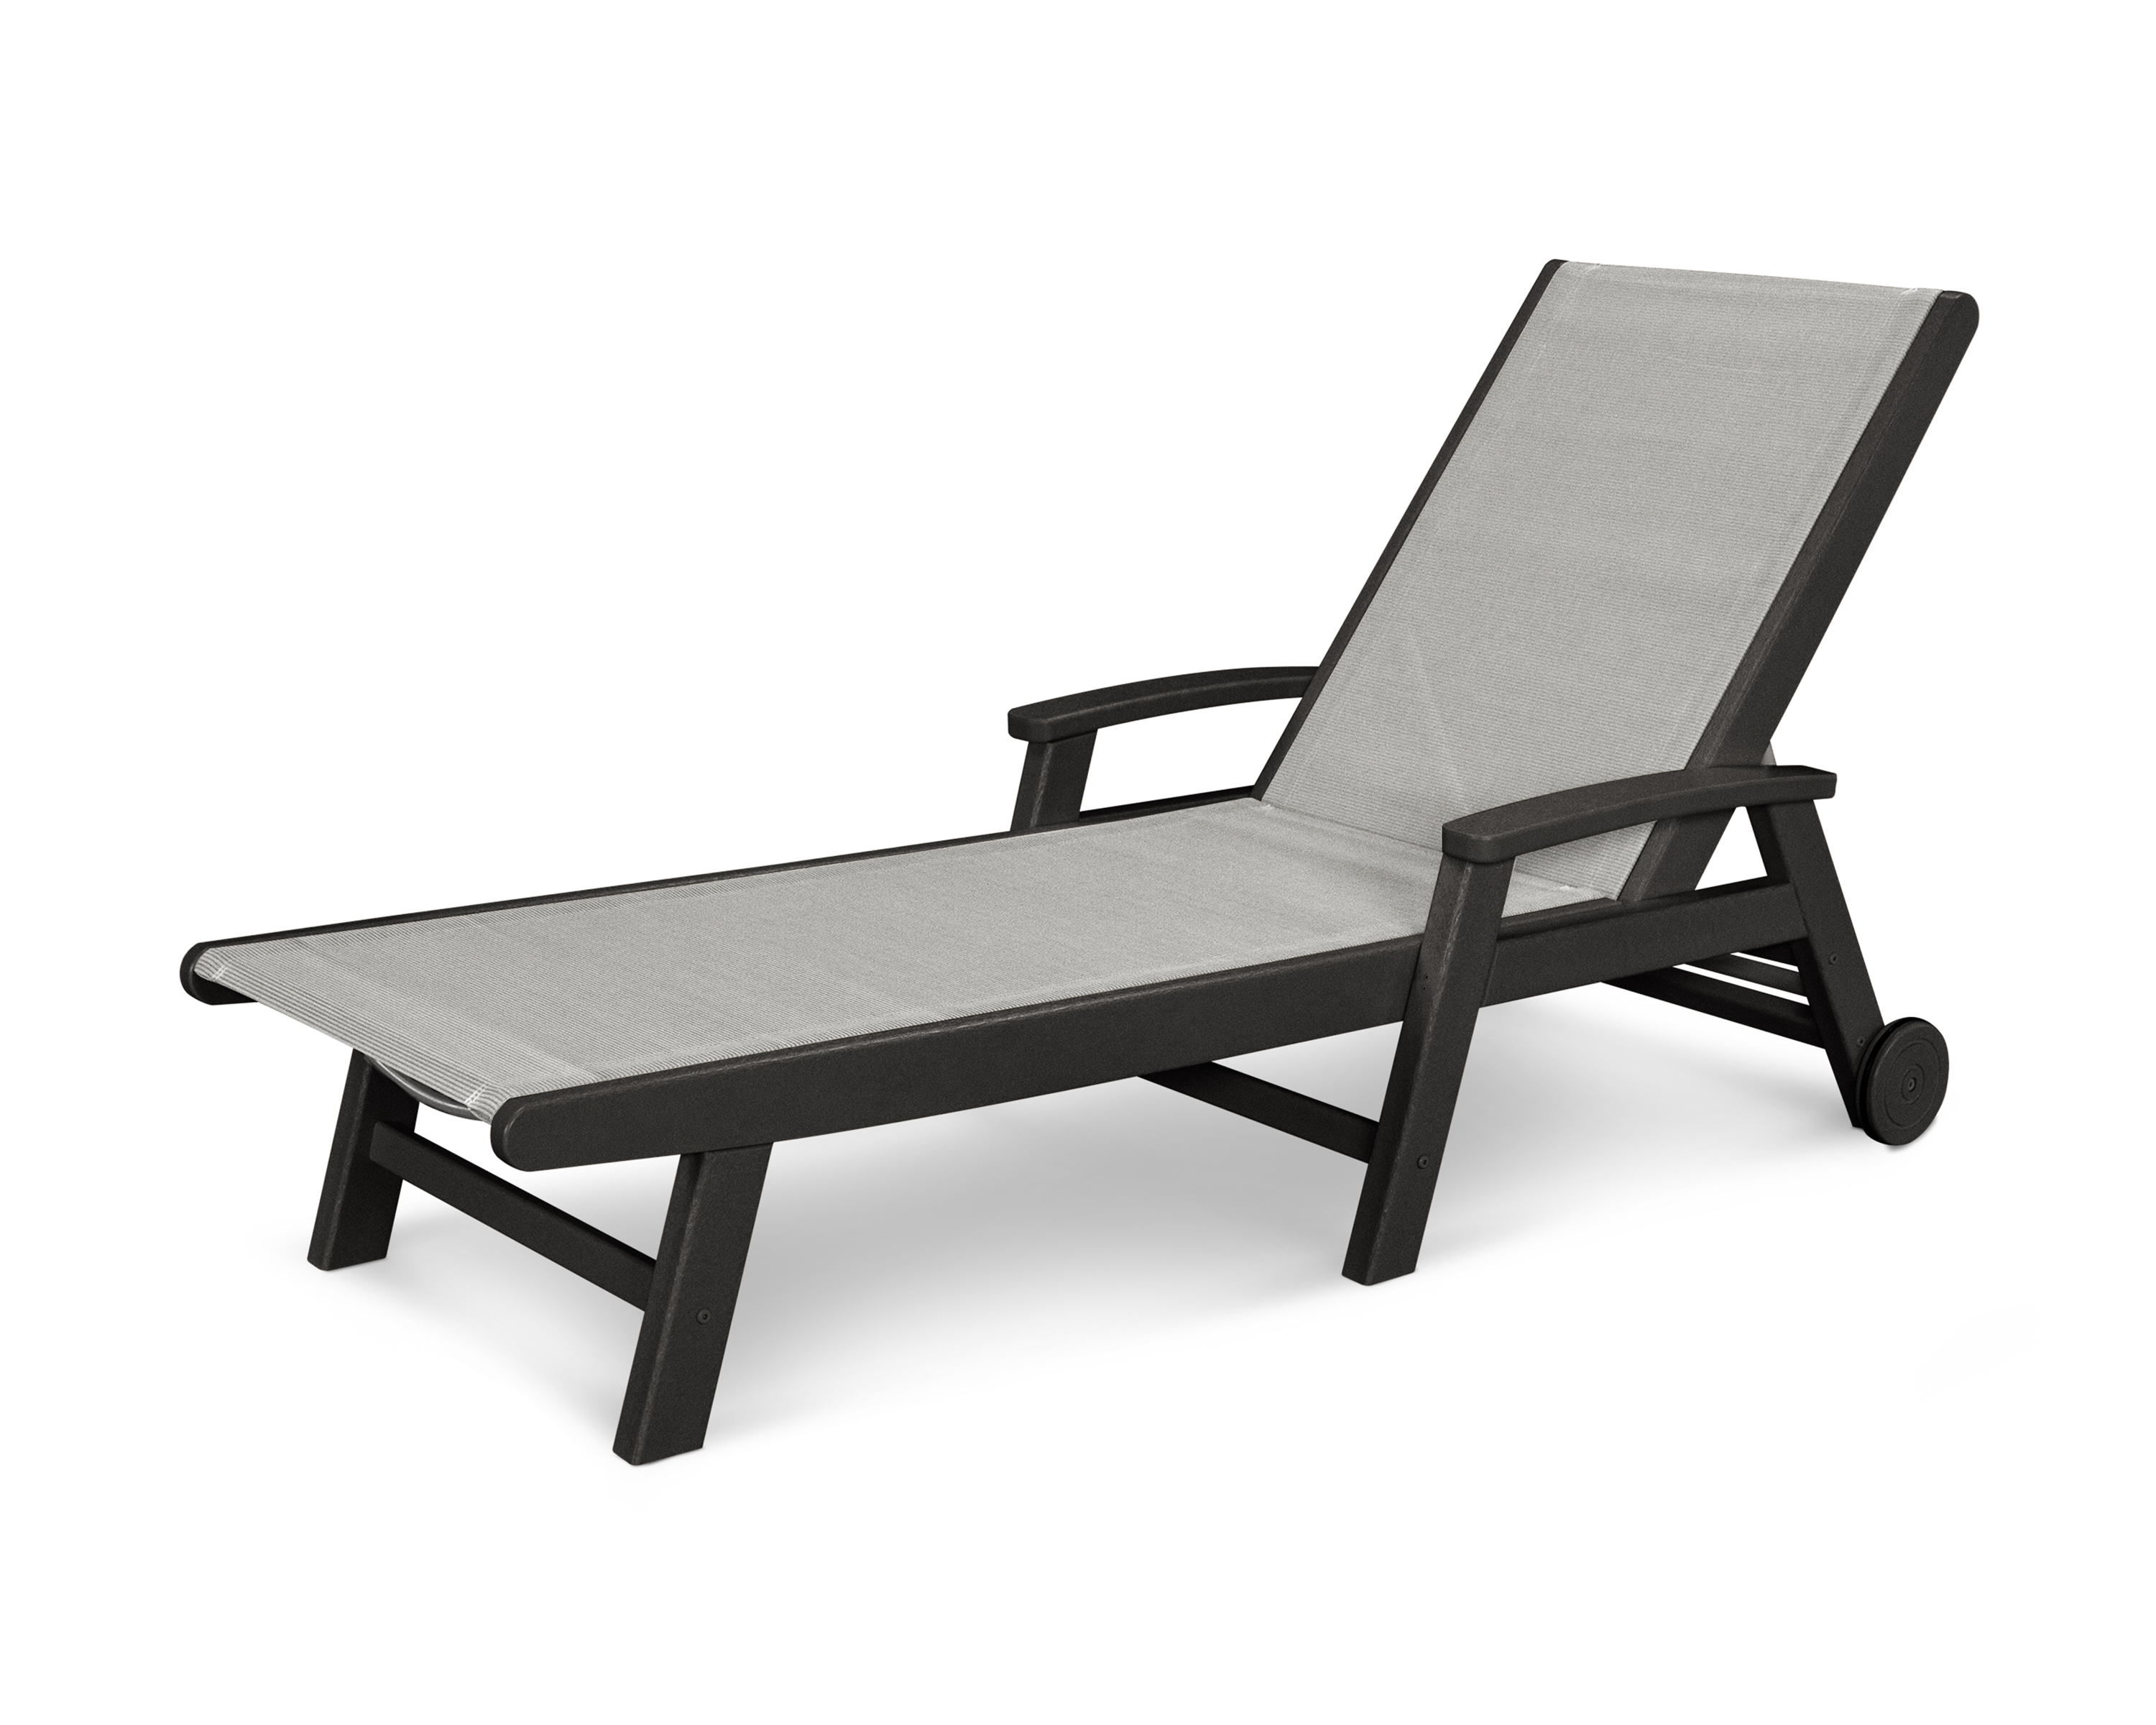 coastal chaise with wheels in black / metallic sling thumbnail image